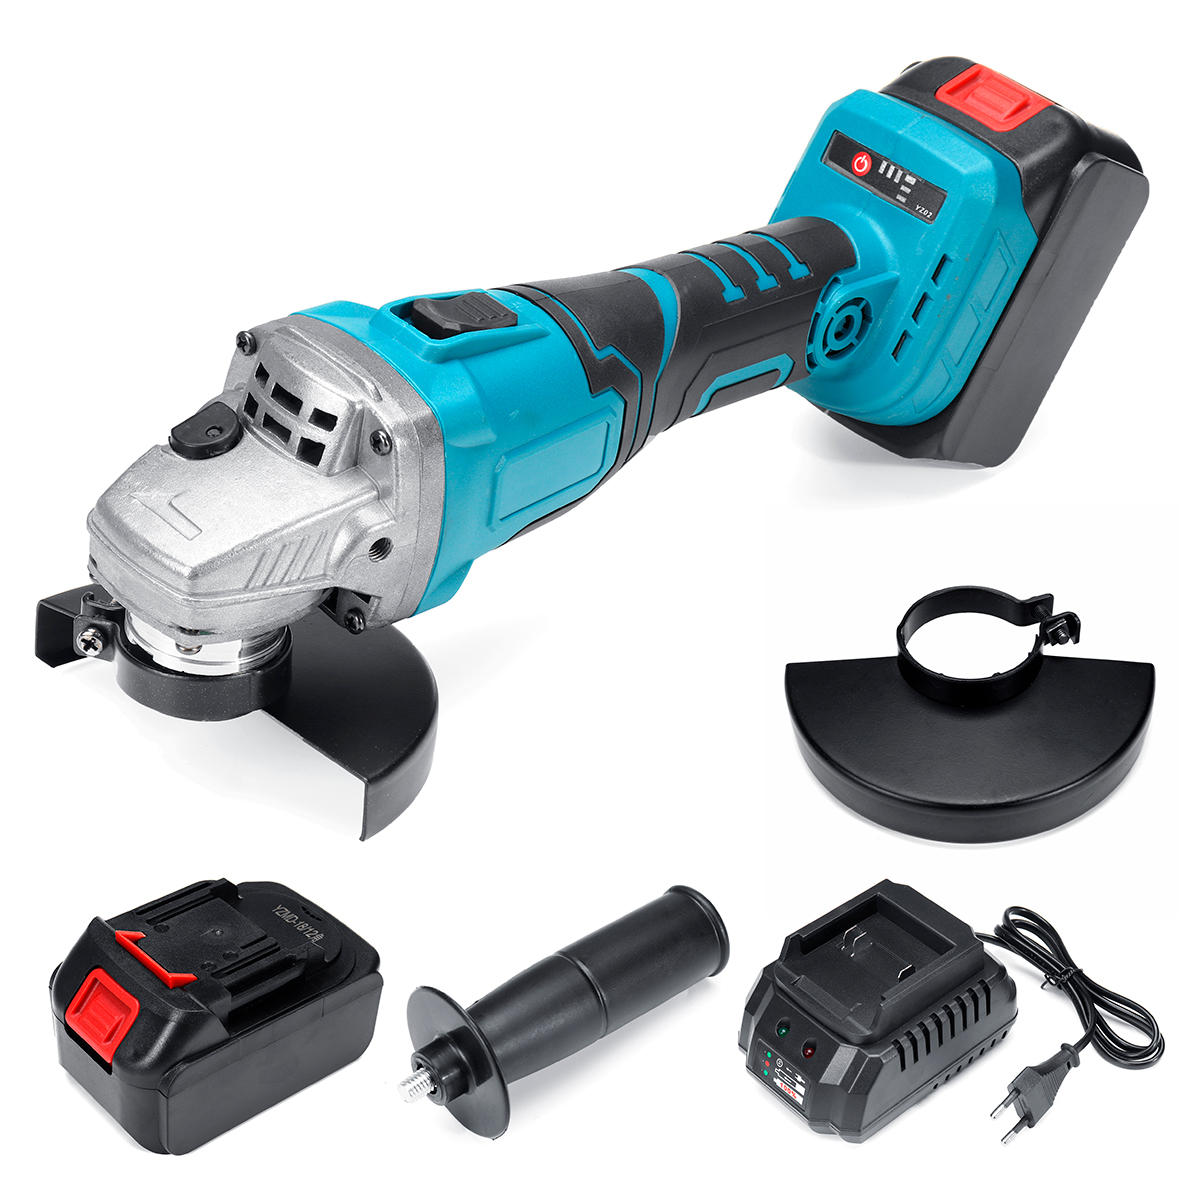 

40V 128TV 29800mA Electric Angle Grinder Cordless Grinding Machine Power Cutting Tool Set